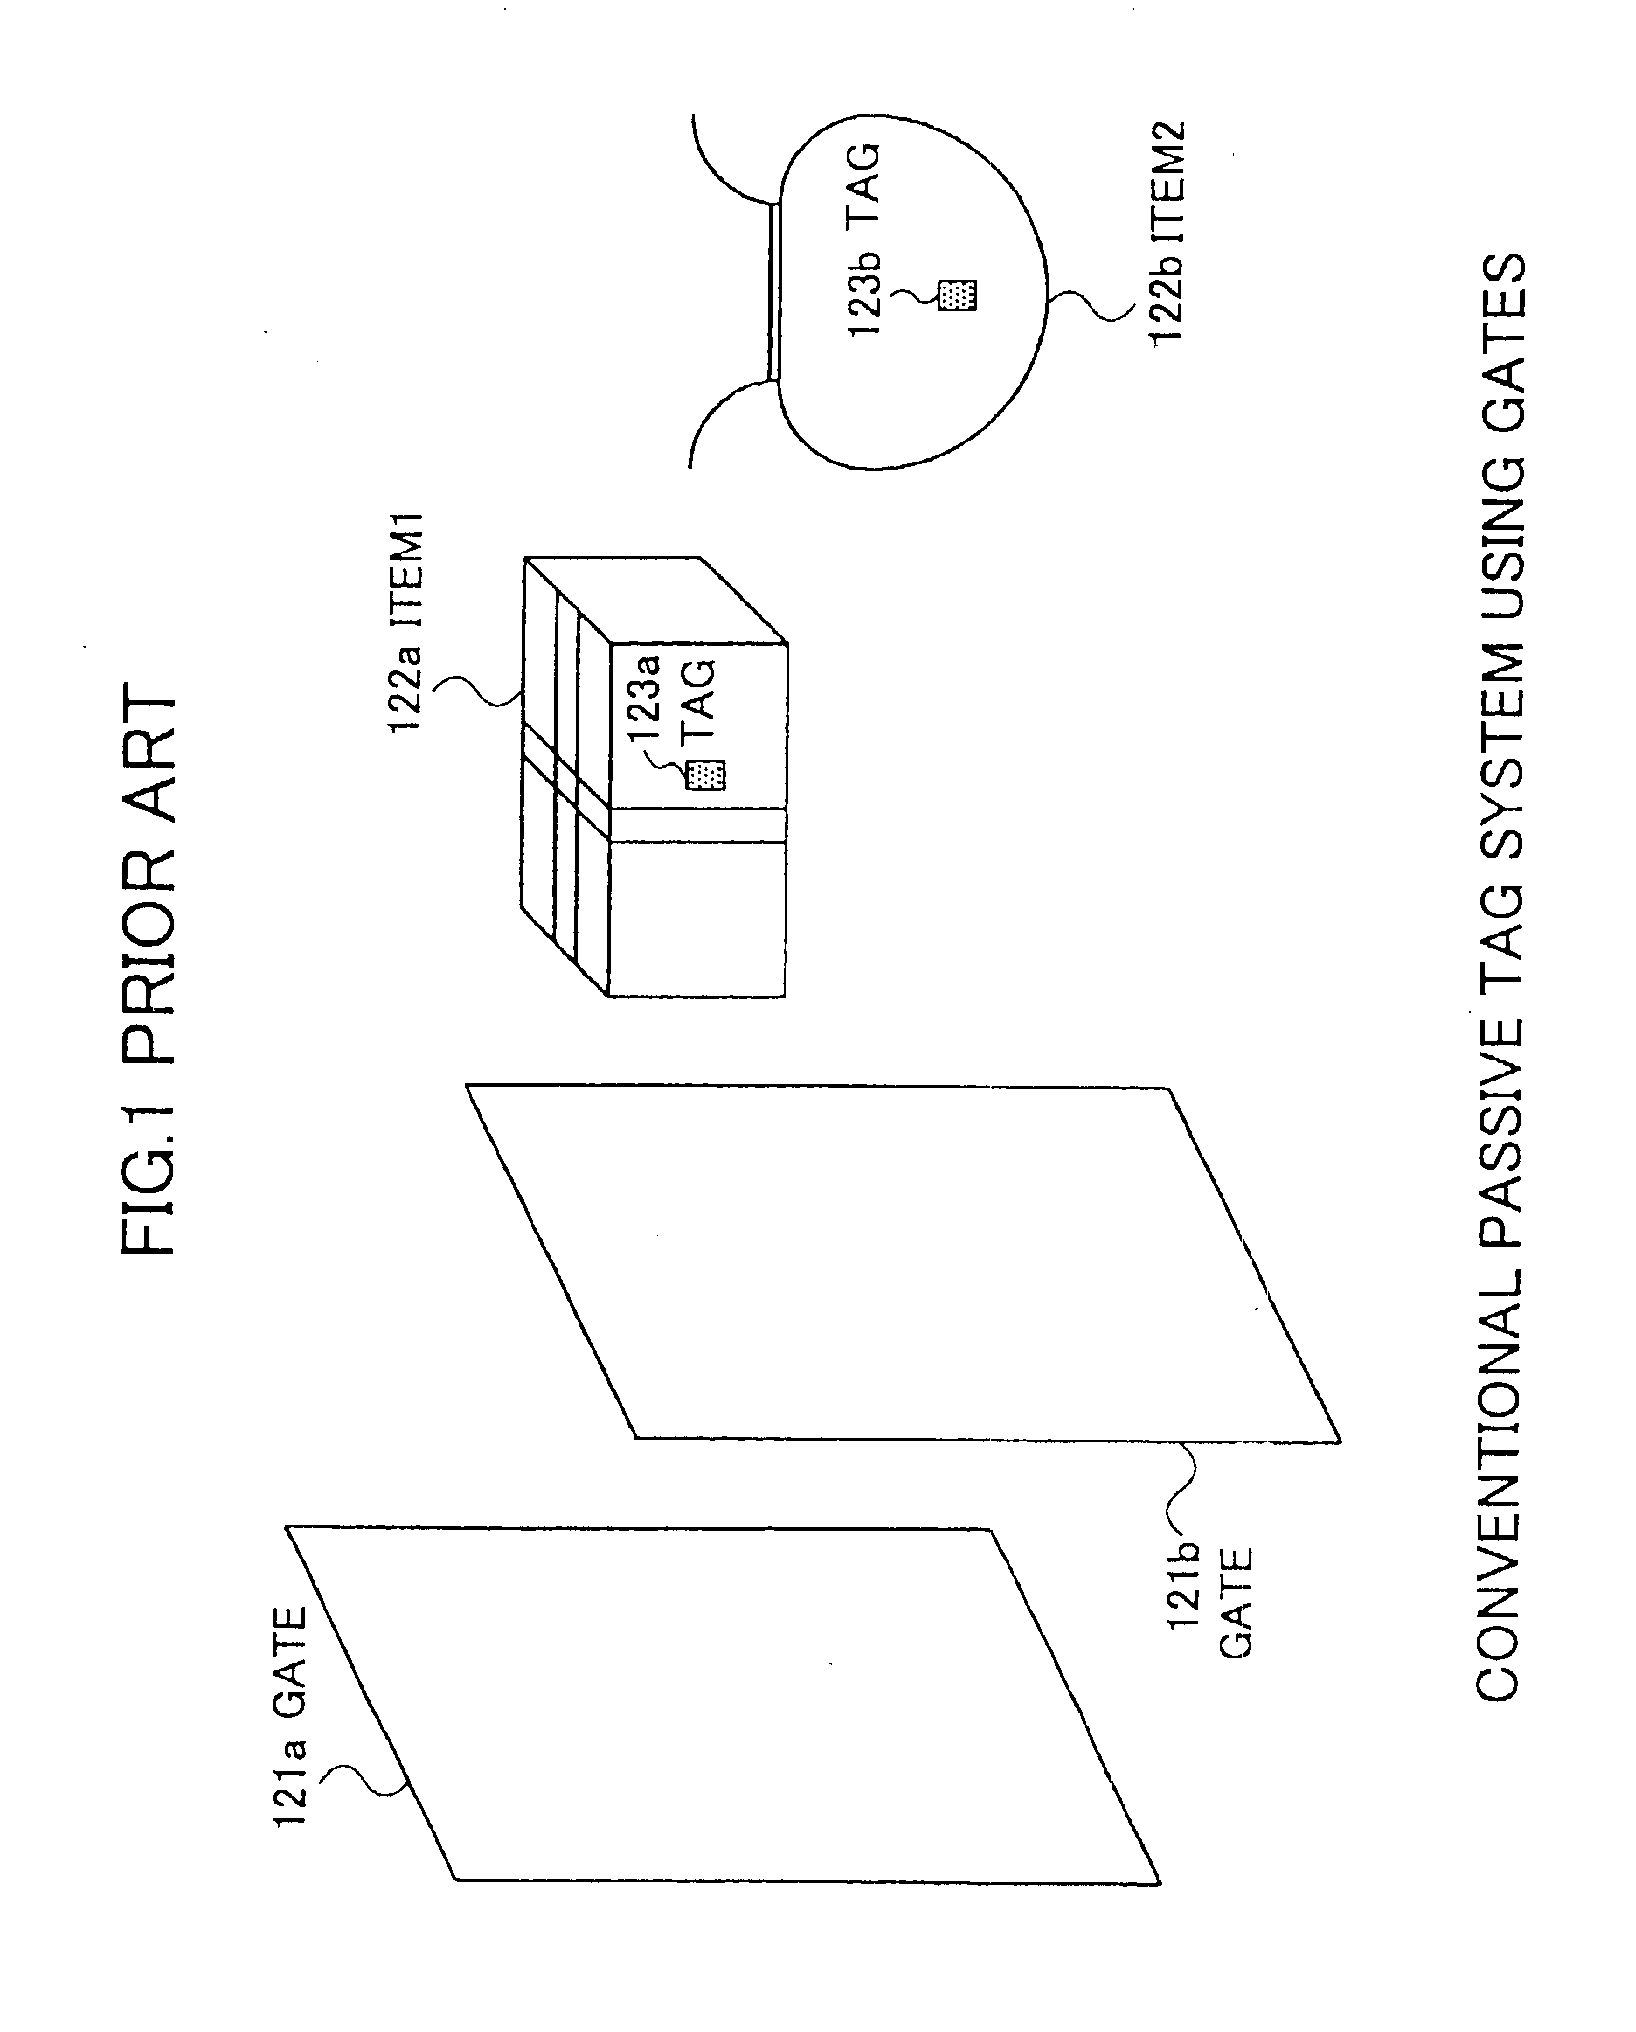 Locating system and method for determining positions of objects